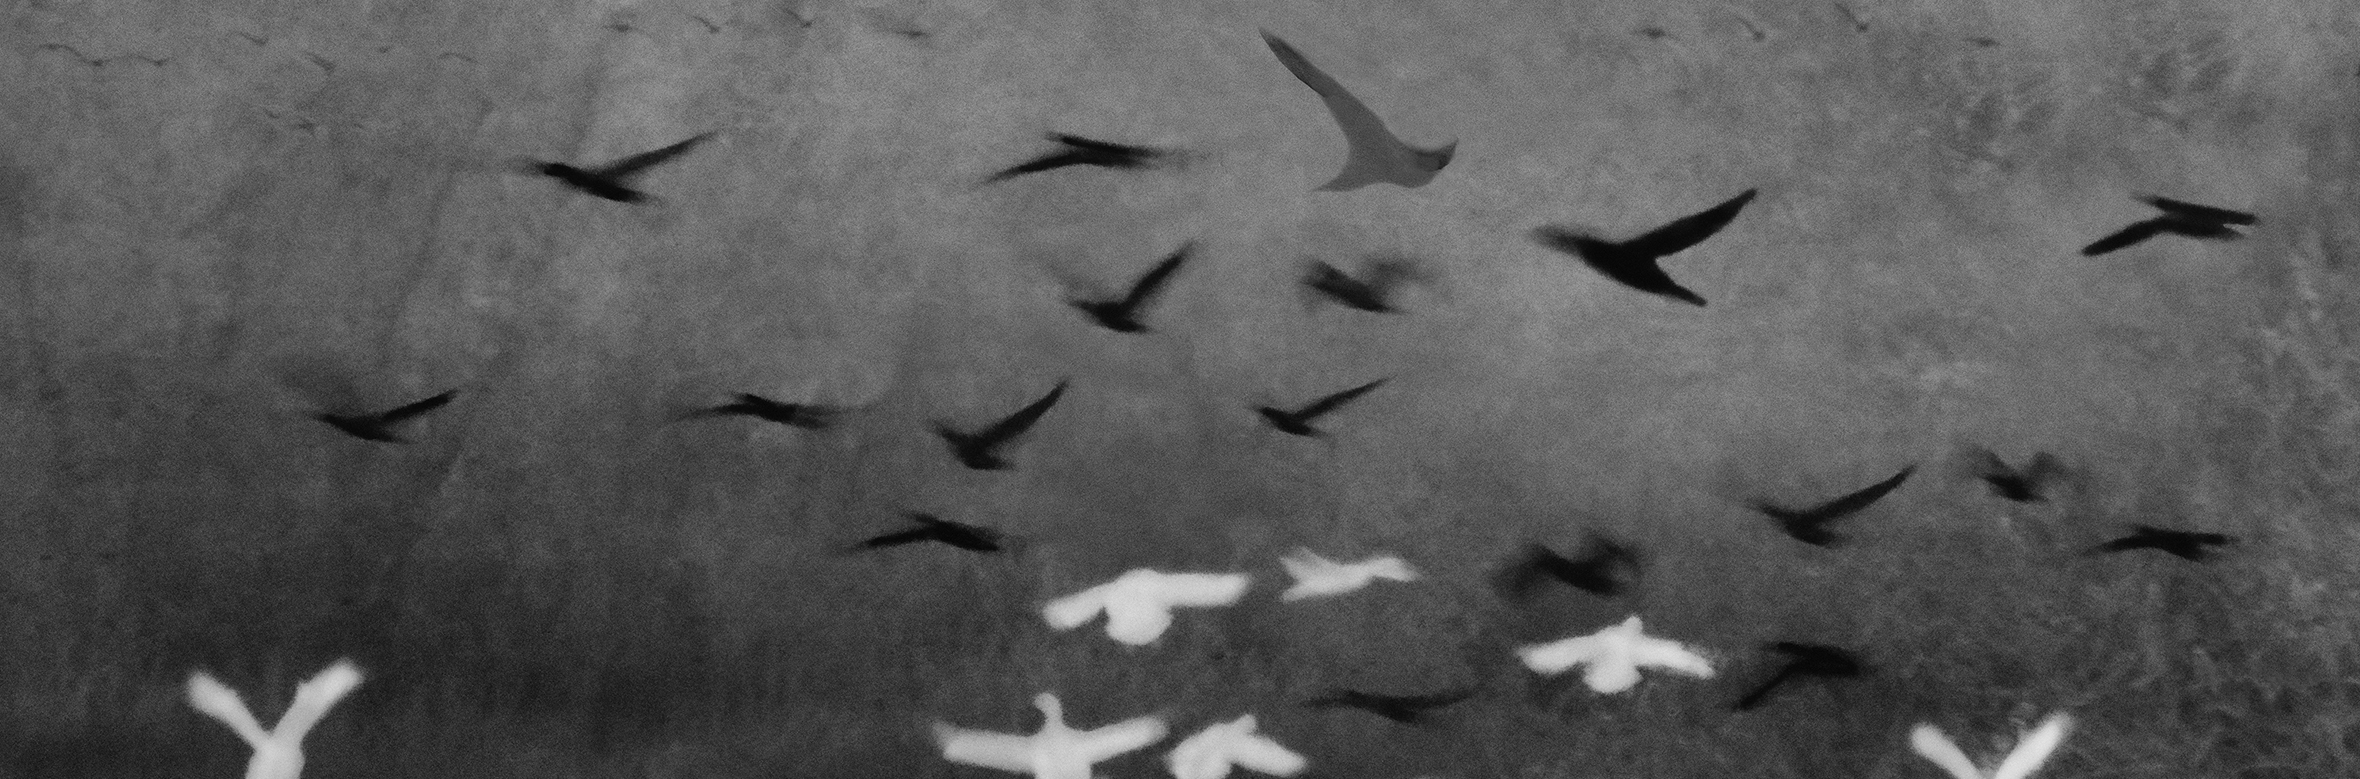 Blurry, dreamlike photo of larger black birds and white birds gliding against a gray background.